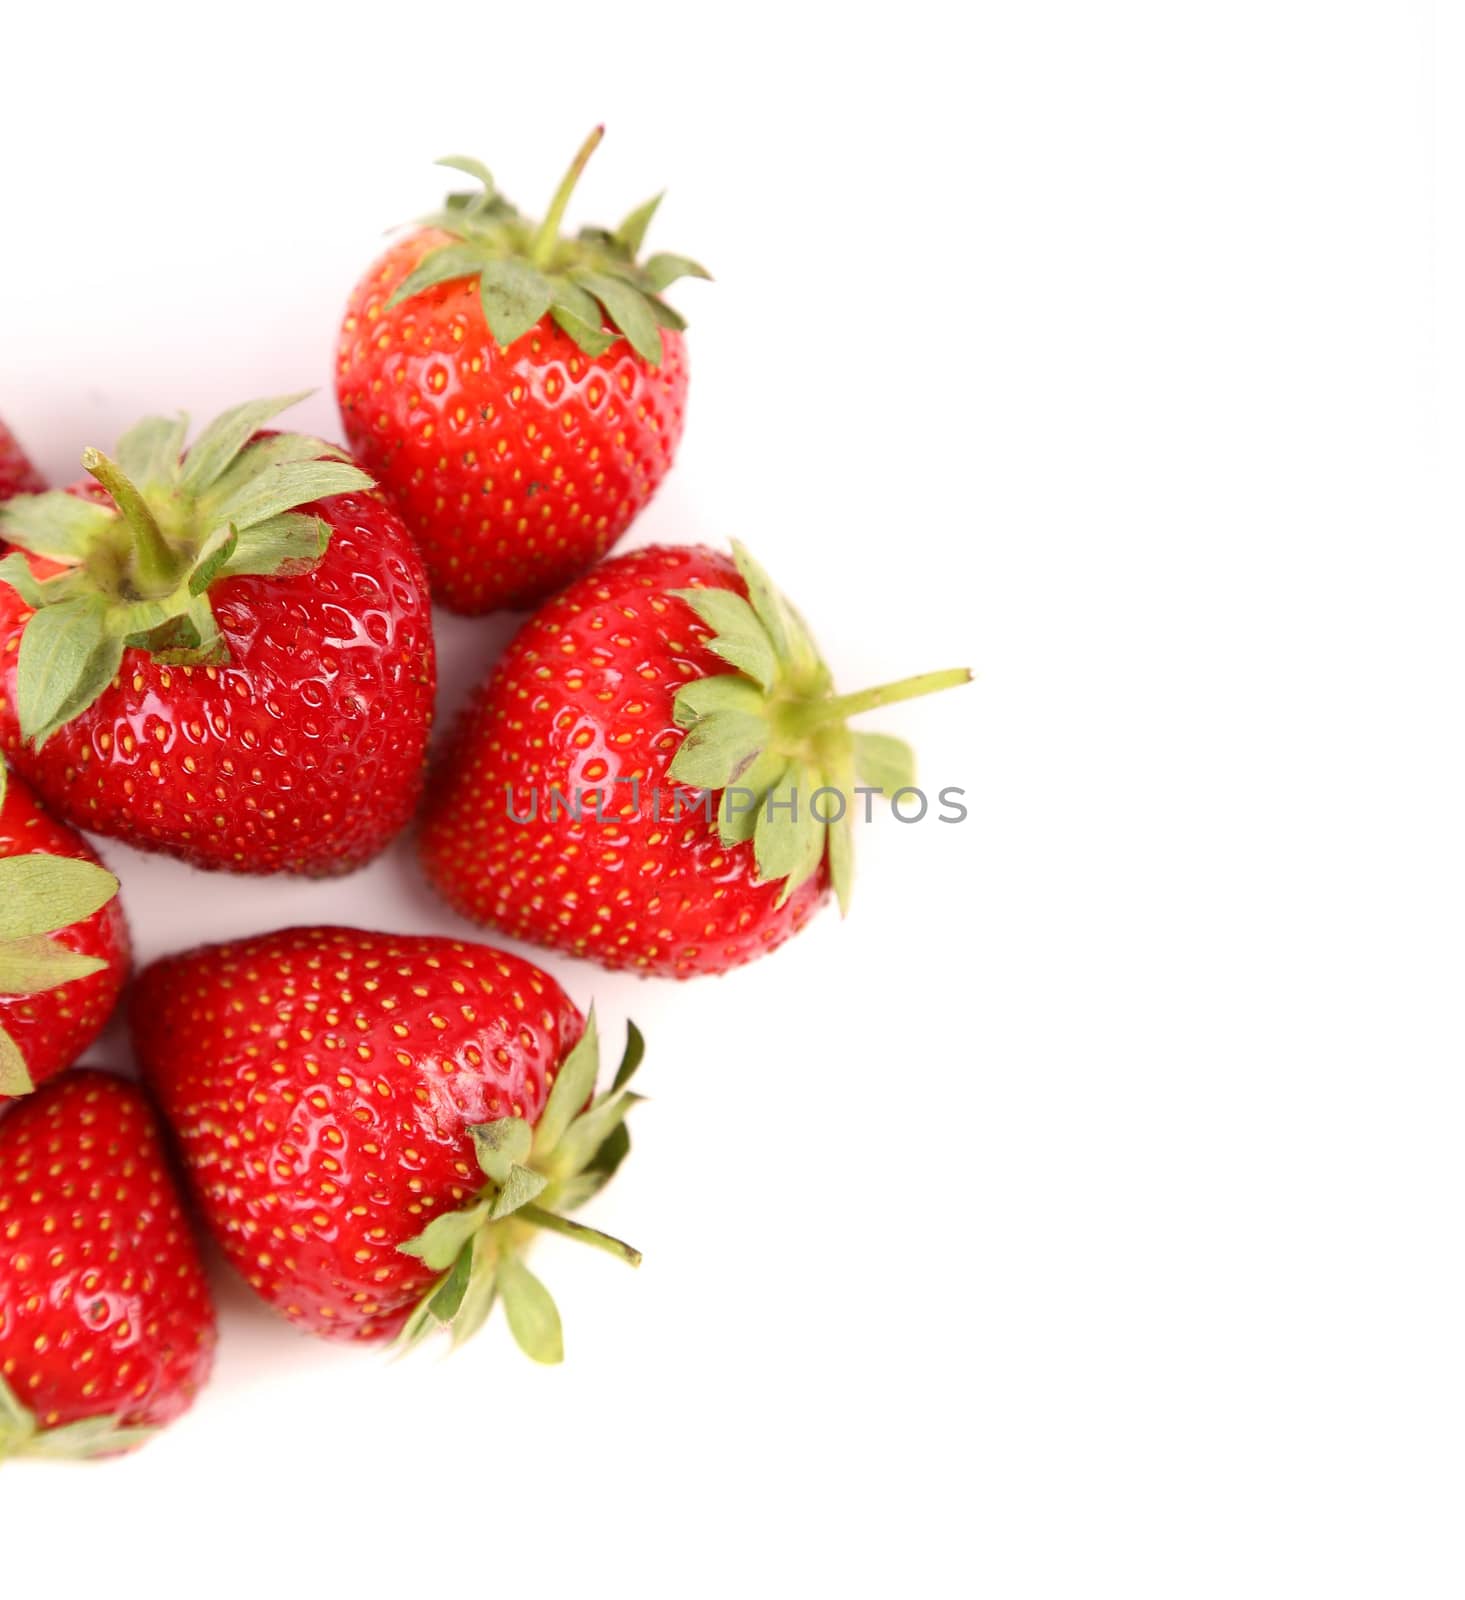 Fresh red ripe strawberries isolated on white